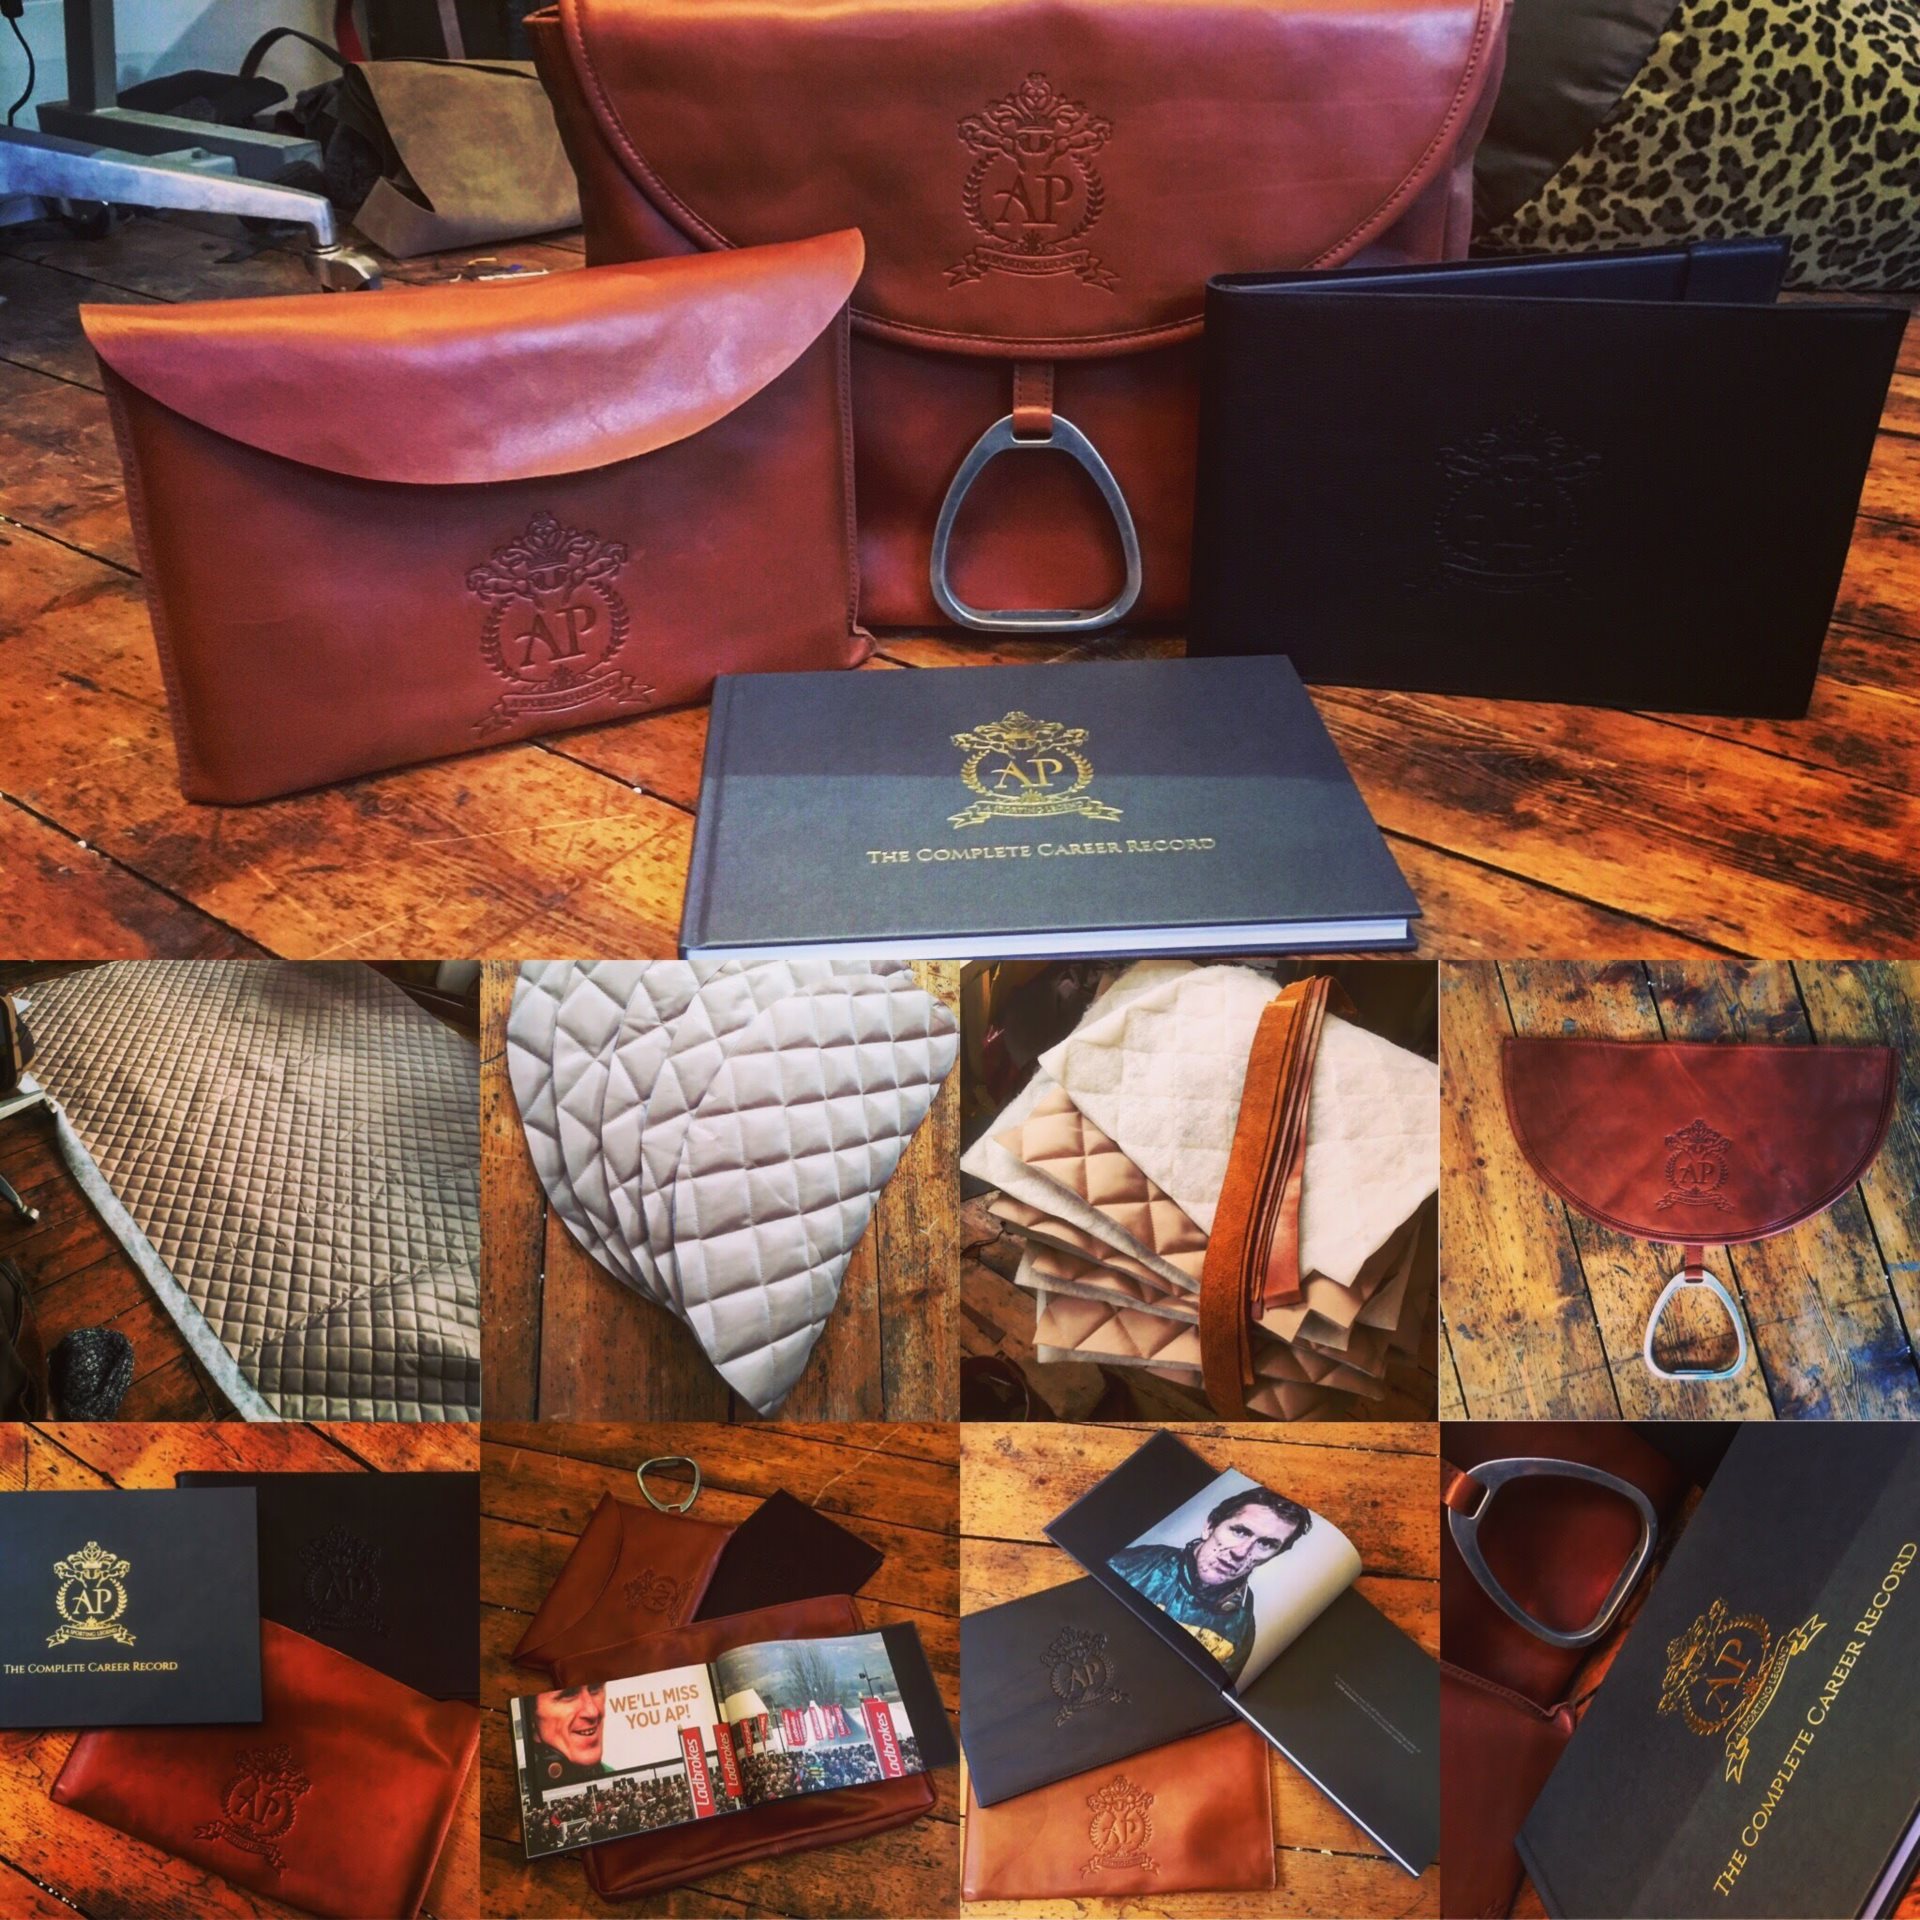 Bespoke Saddle Bags for AP McCoy book launch 